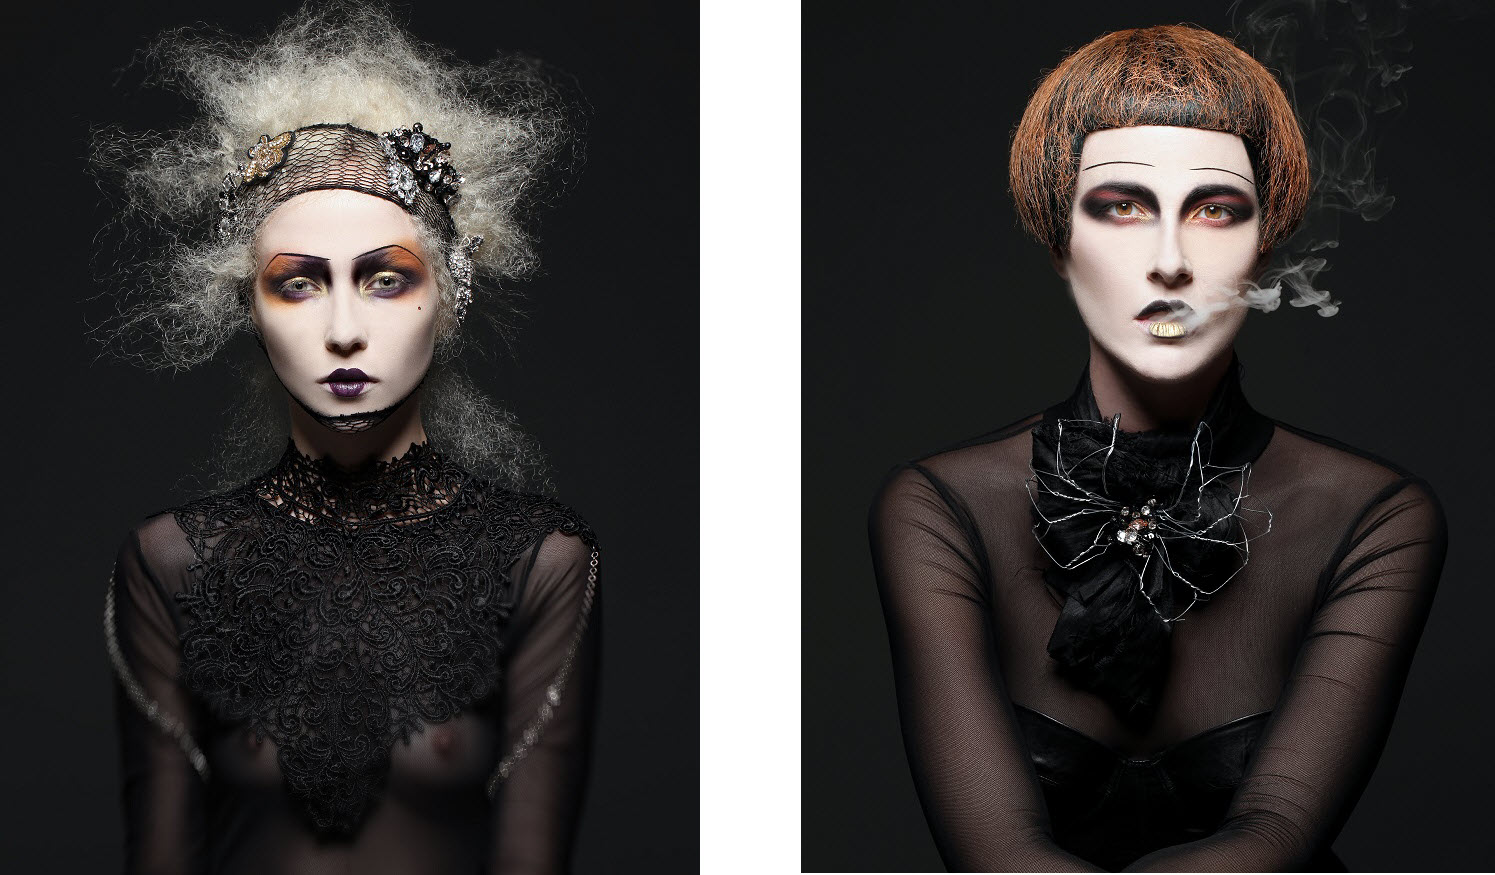 ch-naha-2019-finalists-hairstylist-of-the-year